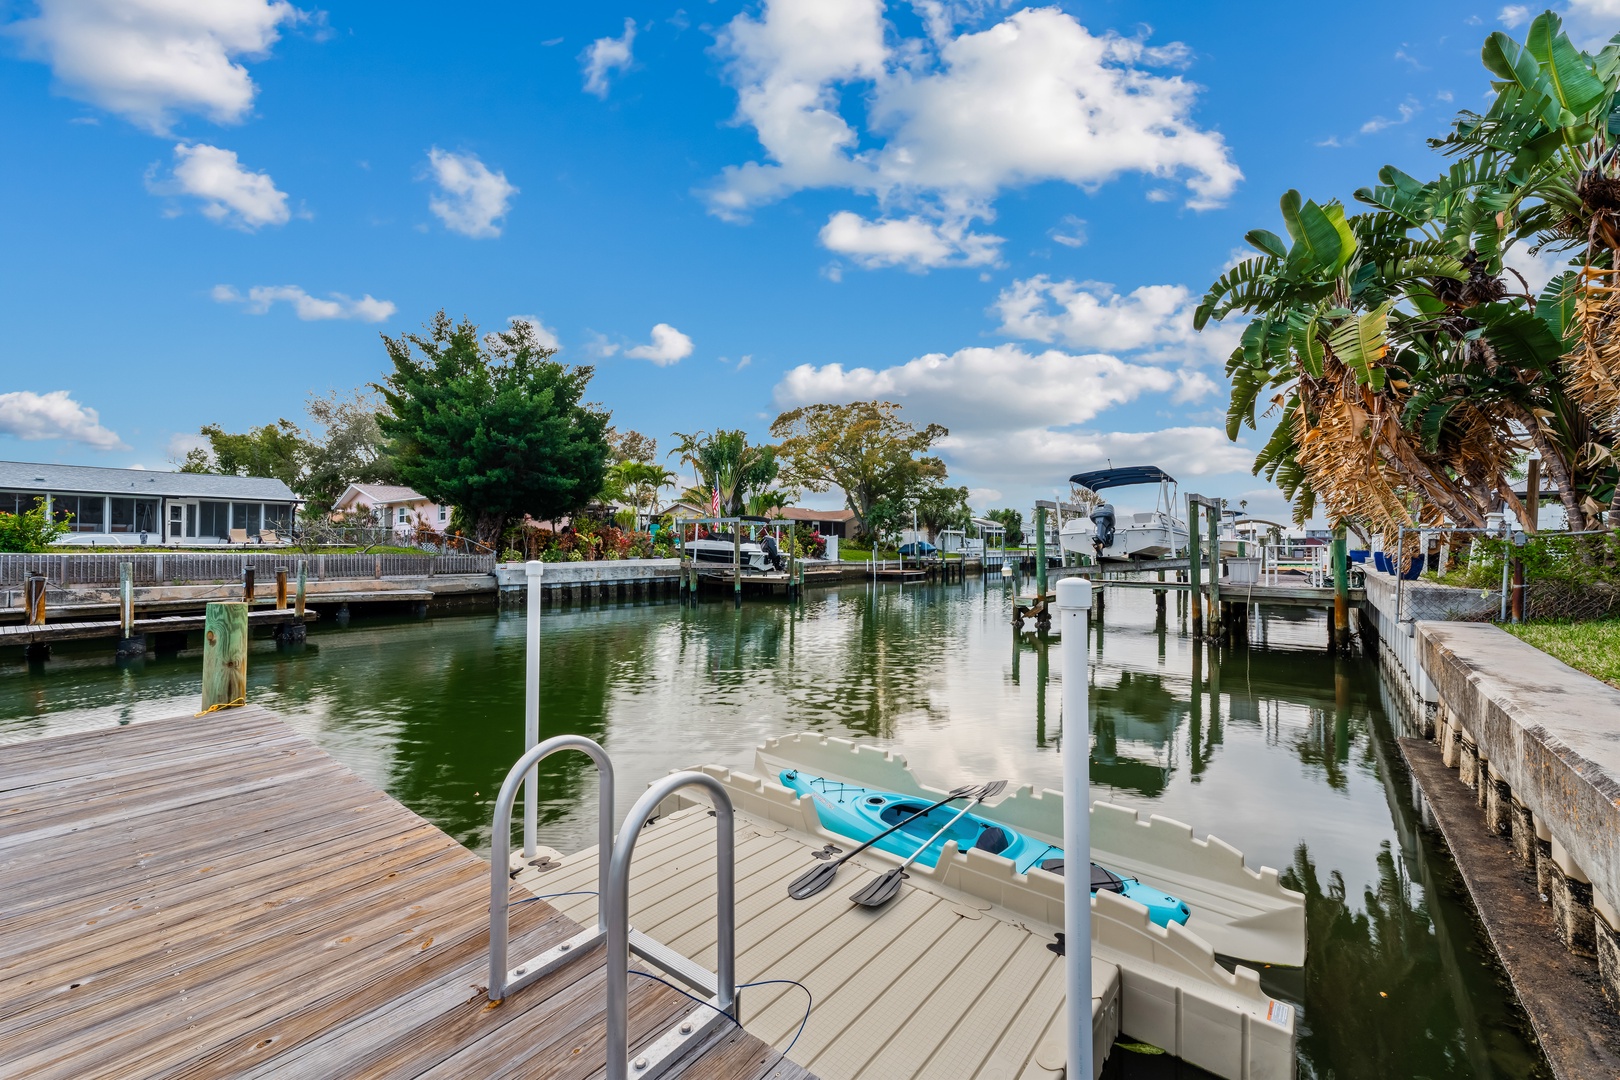 Embark on kayak adventures or cast a fishing line from the private dock